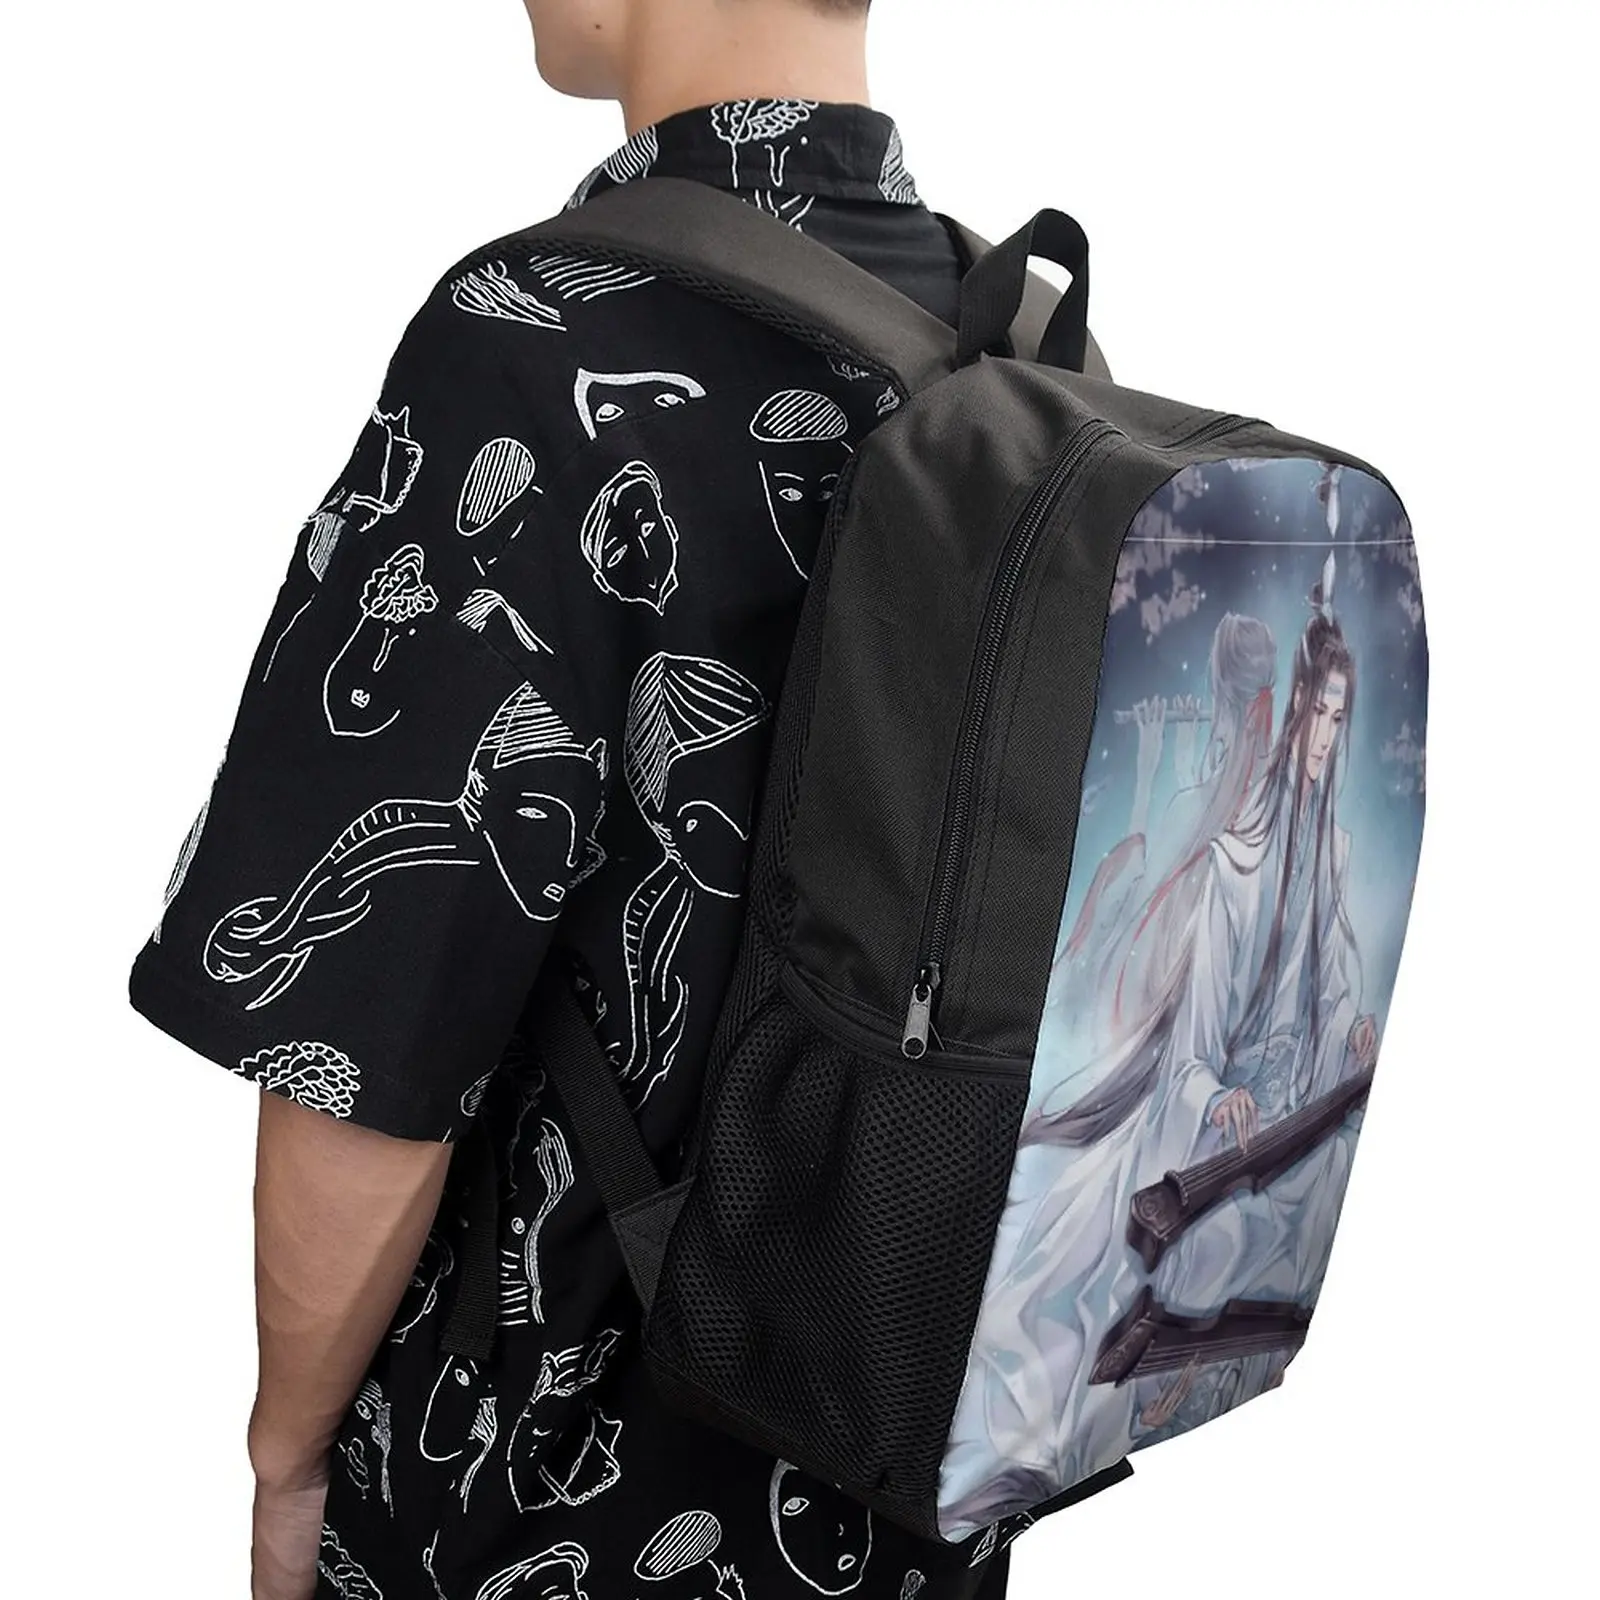 

The Untamed 8 17 Inch Shoulder Backpack Vintage Sports Activities Casual Graphic Firm Snug Rucksack